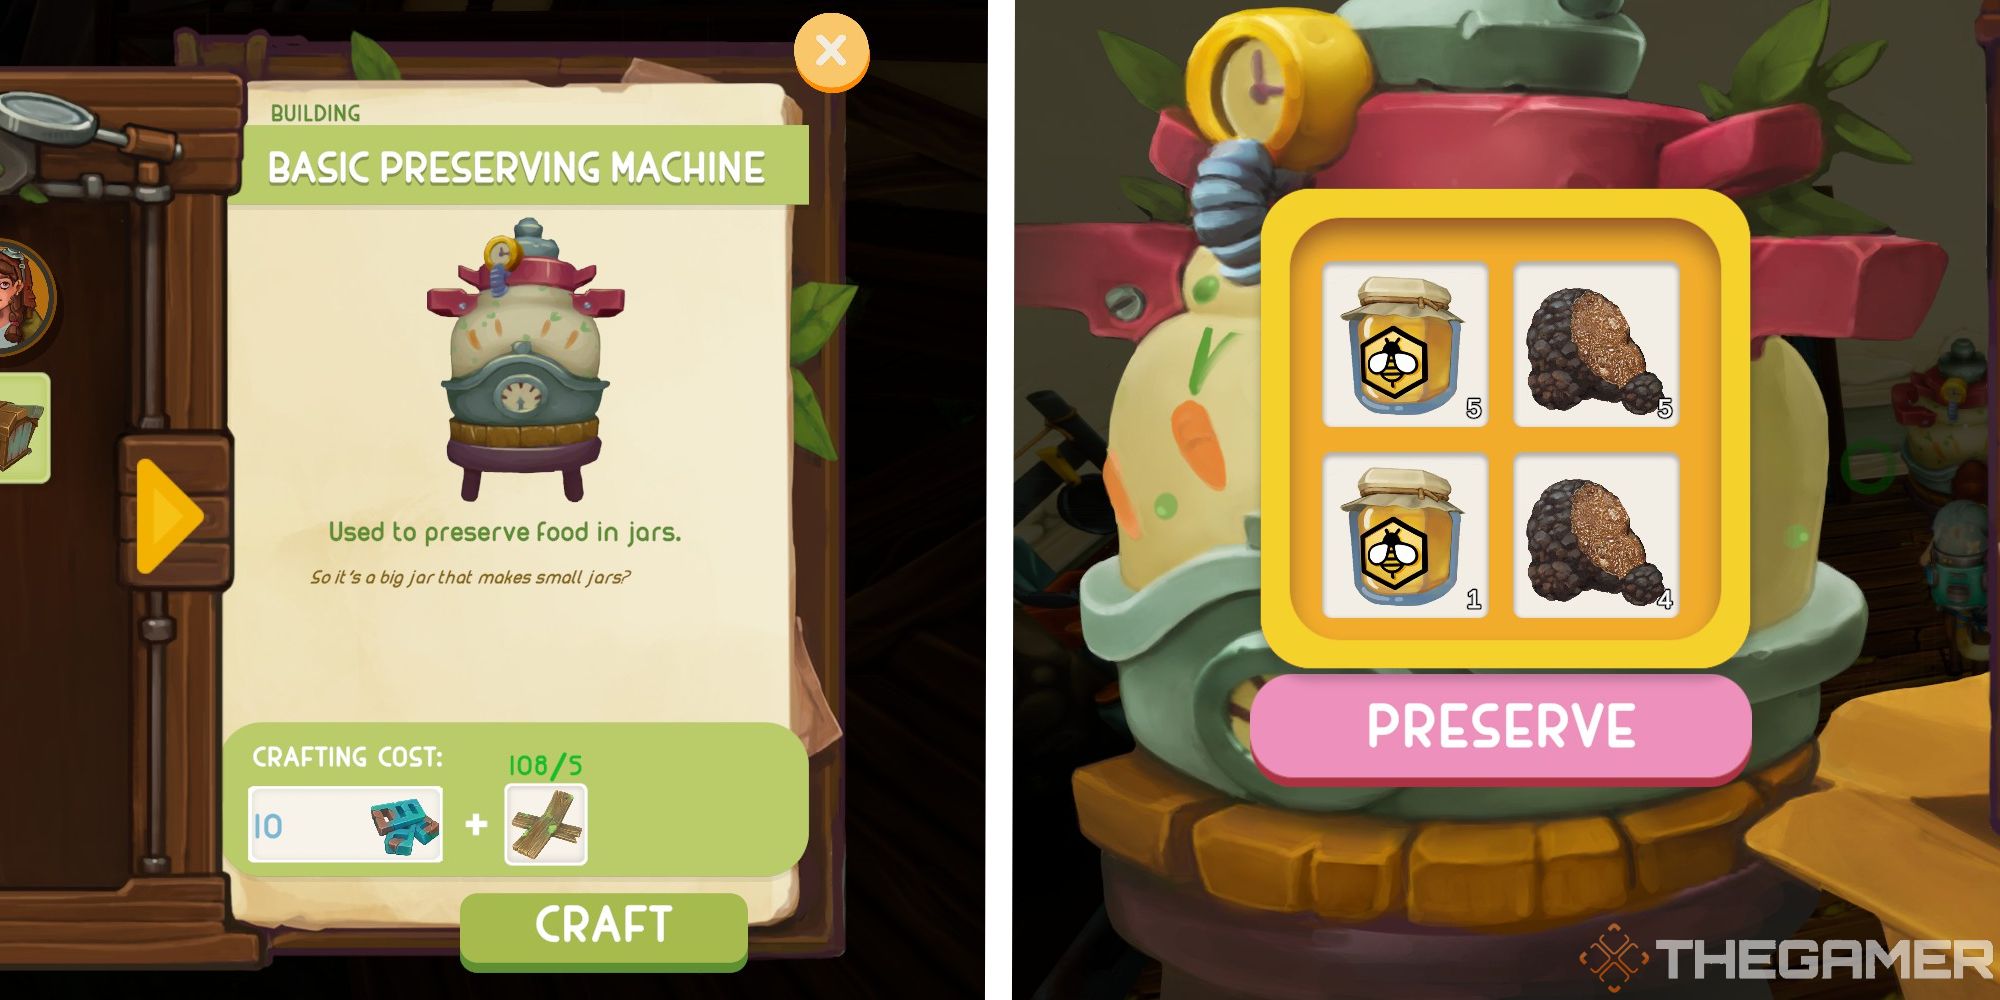 image of crafting screen for the preserving machine next to image of machine interface with honey and truffles placed